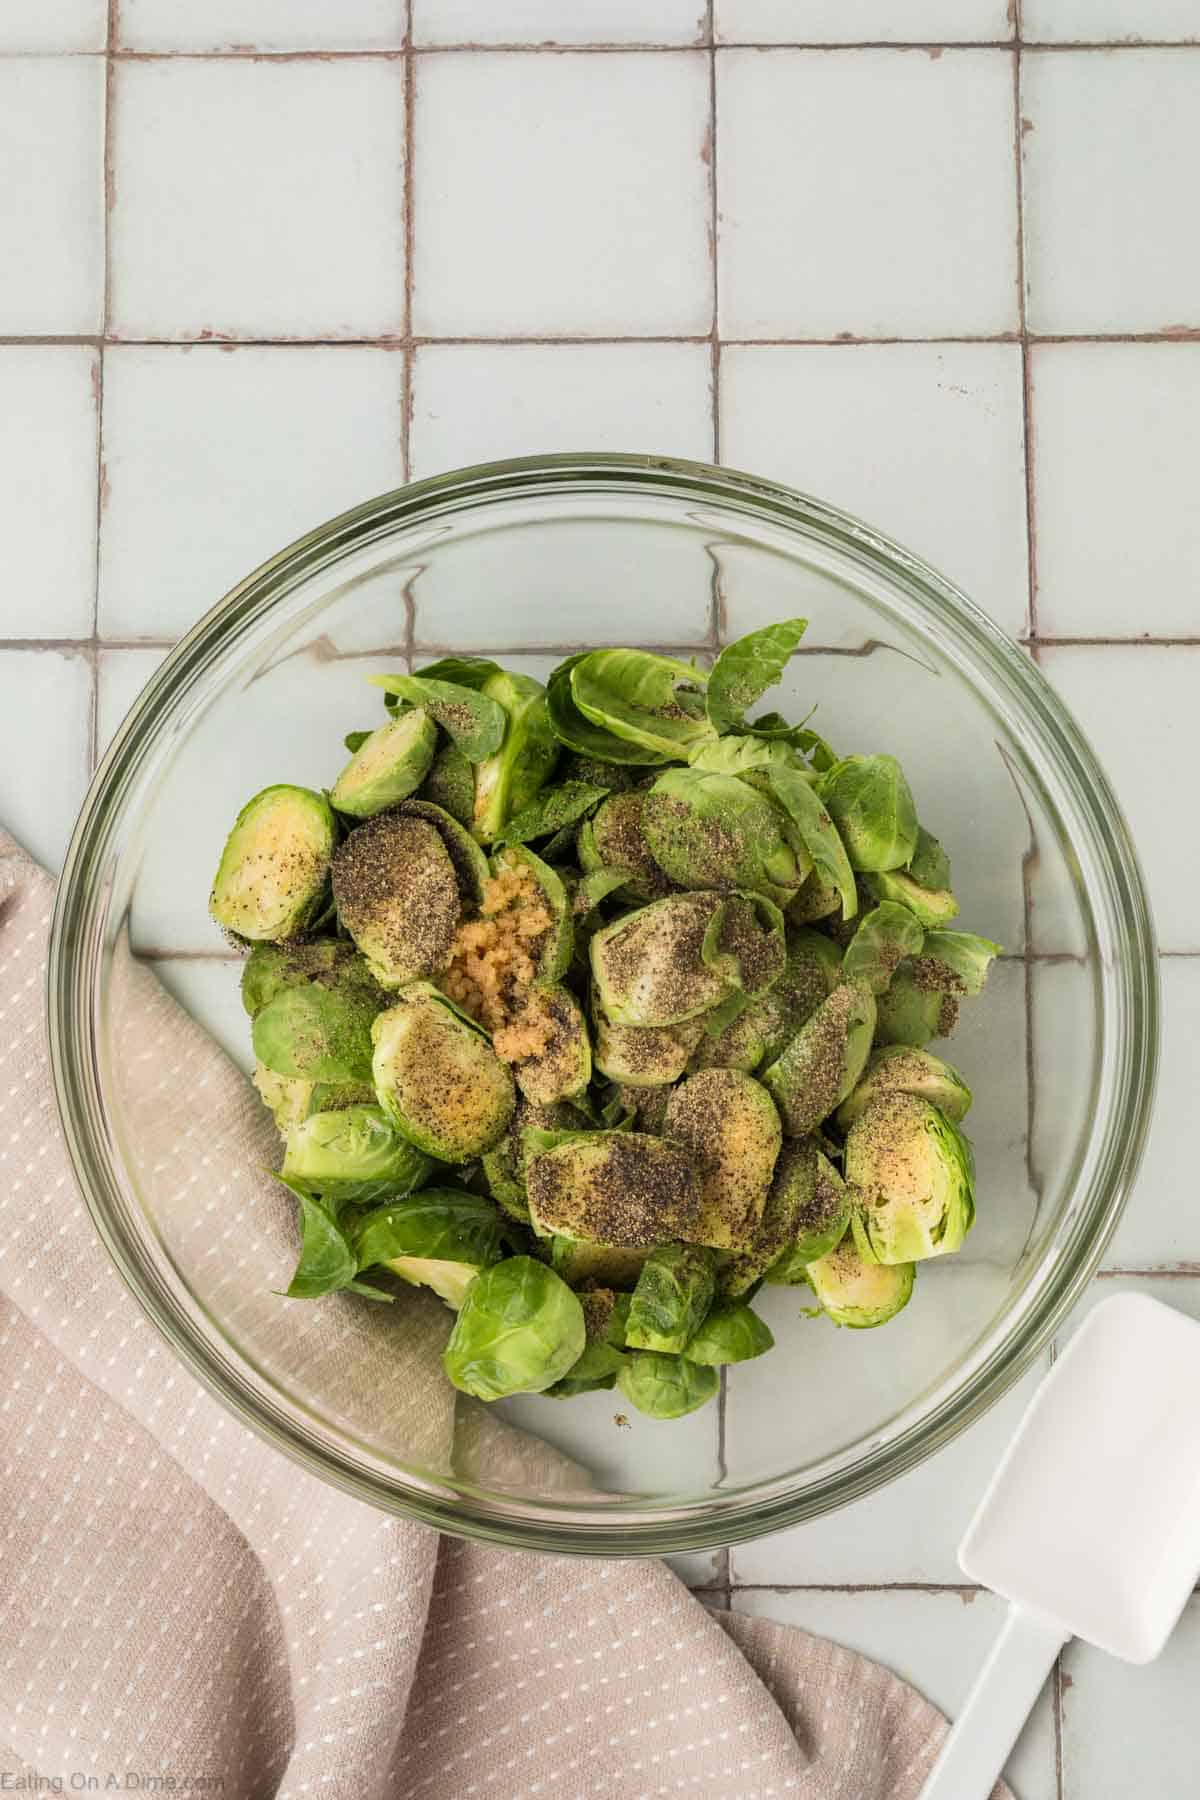 A glass bowl filled with halved Brussels sprouts seasoned with ground black pepper and minced garlic, perfect for an air fryer Brussels sprouts recipe. It's placed on a white tiled surface, accompanied by a white spatula and a beige, textured cloth.